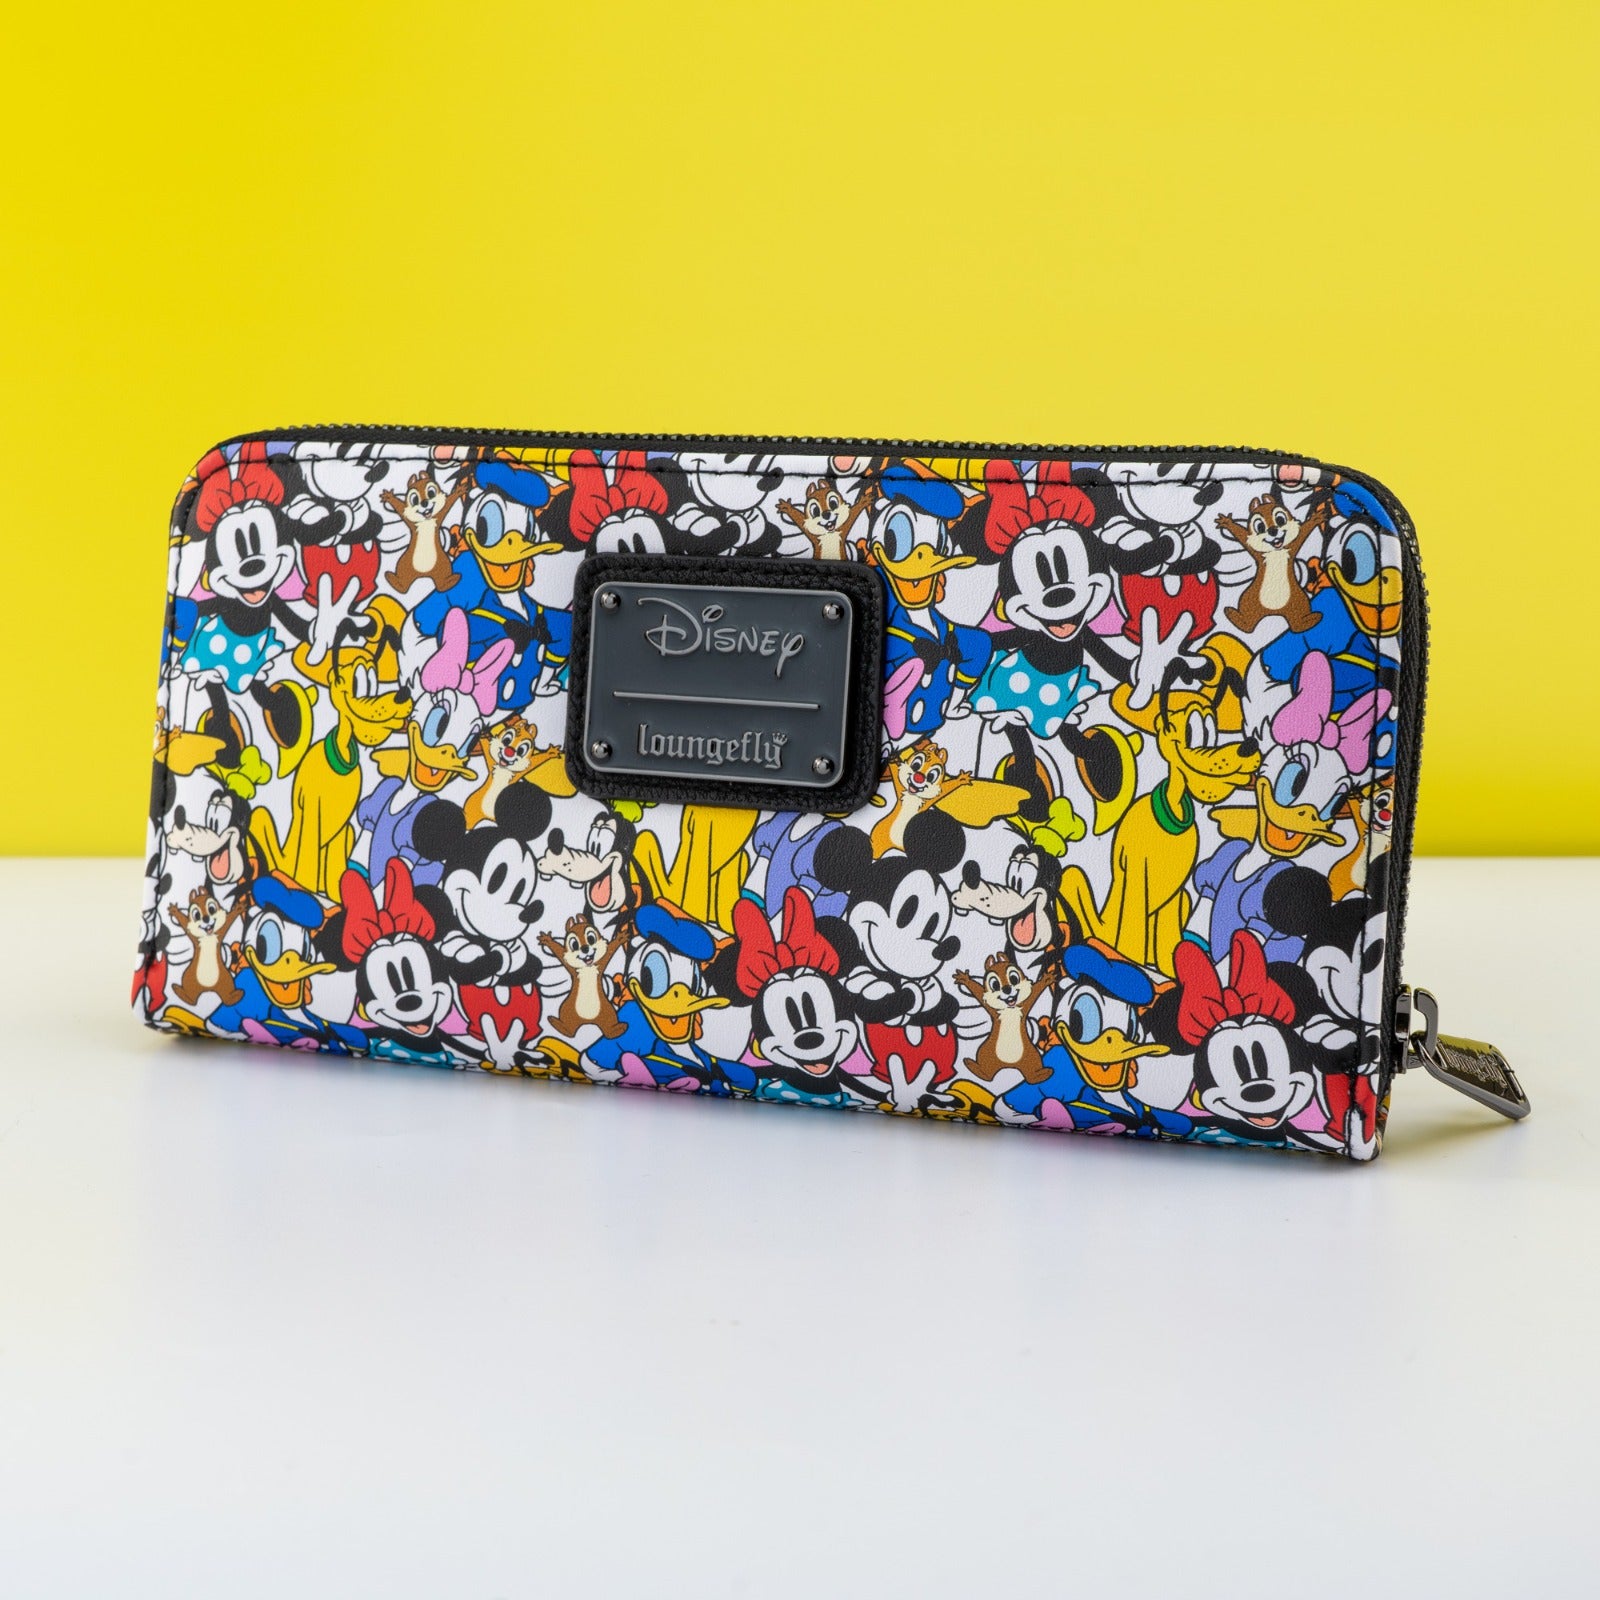 Loungefly x Disney Mickey and Friends Purse